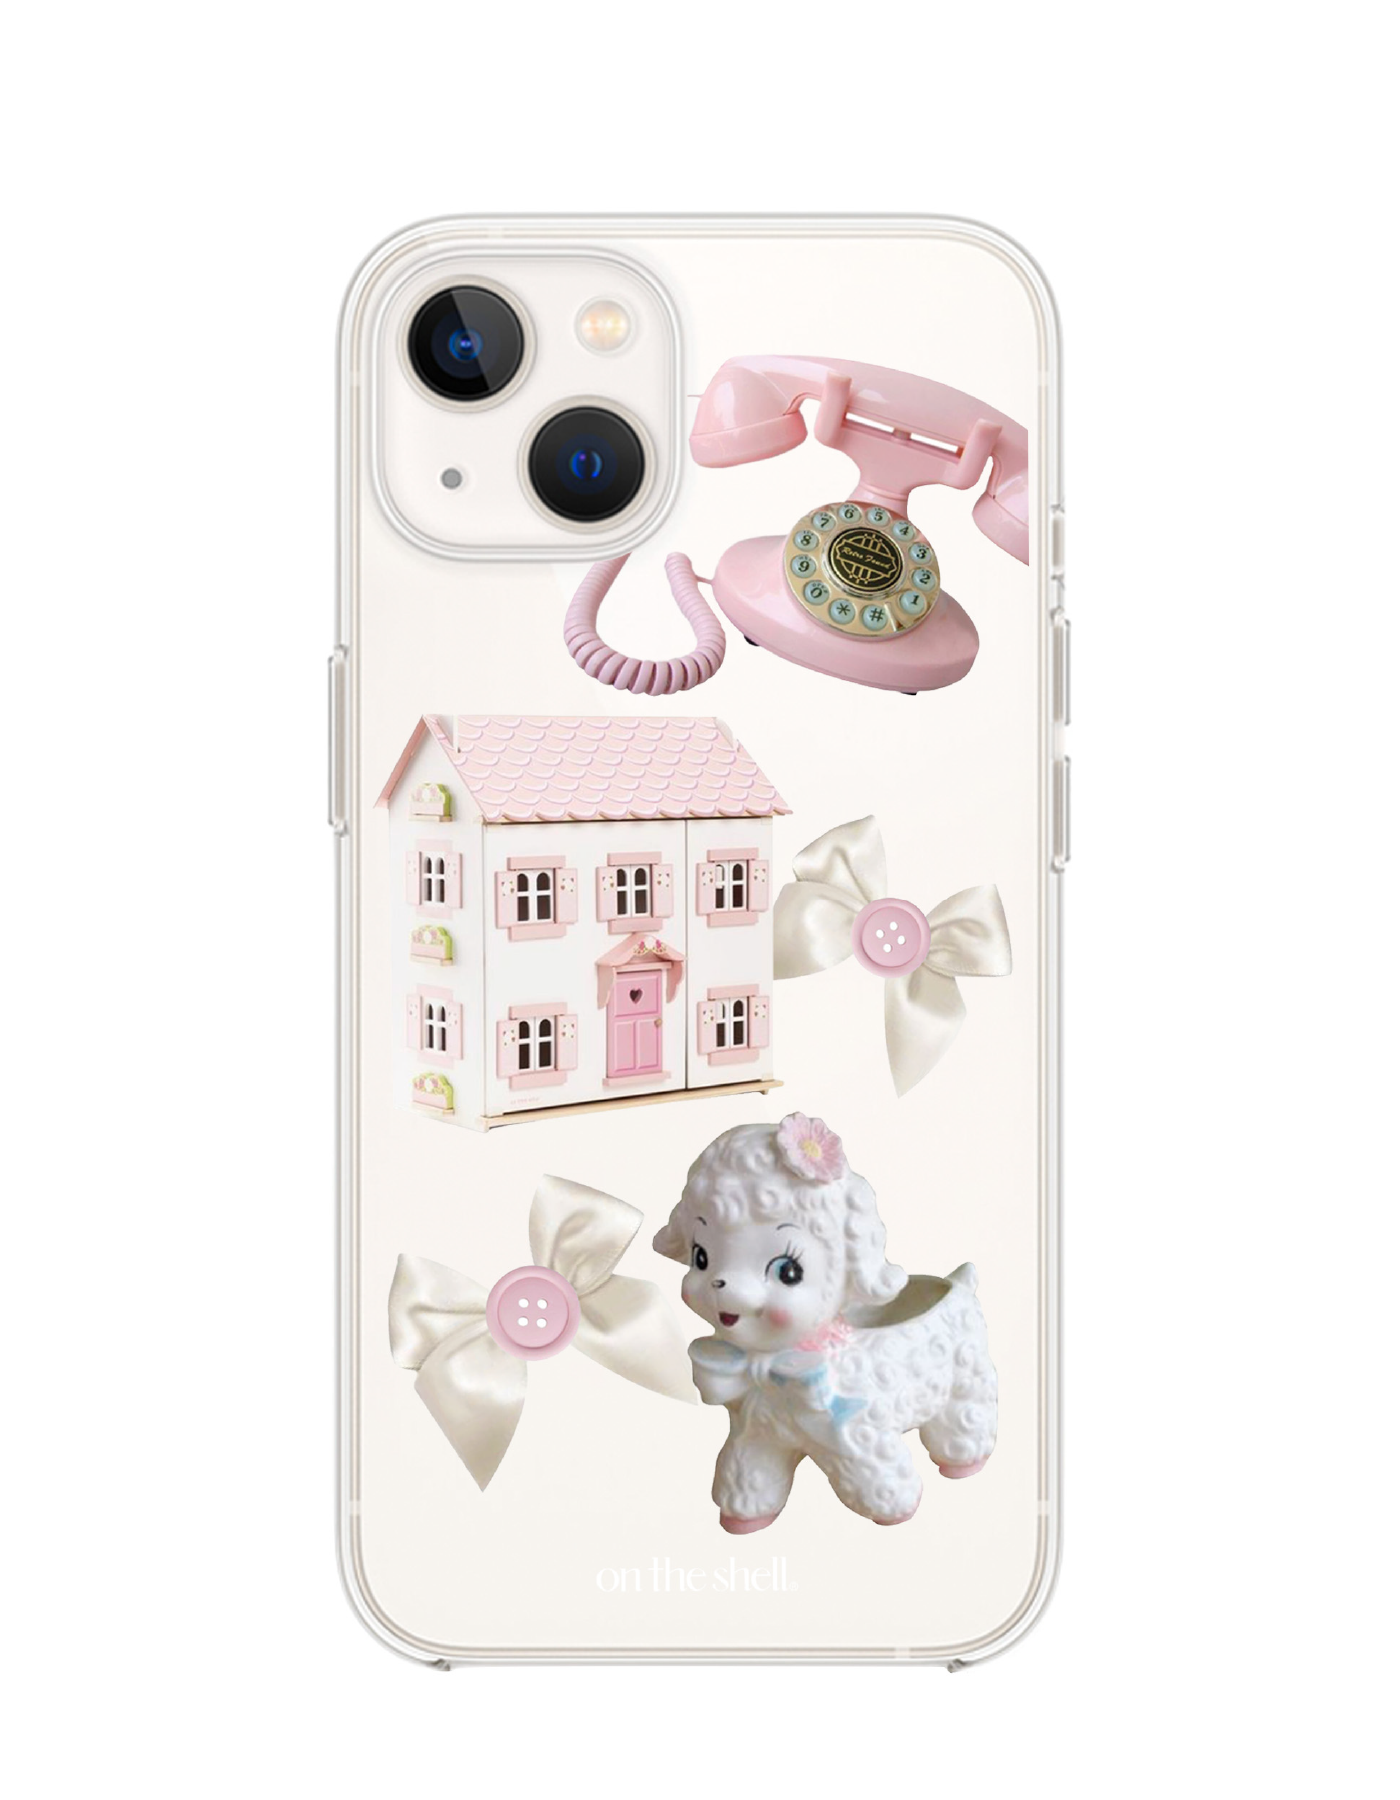 (Jell hard) Vintage pink doll house Iphone case